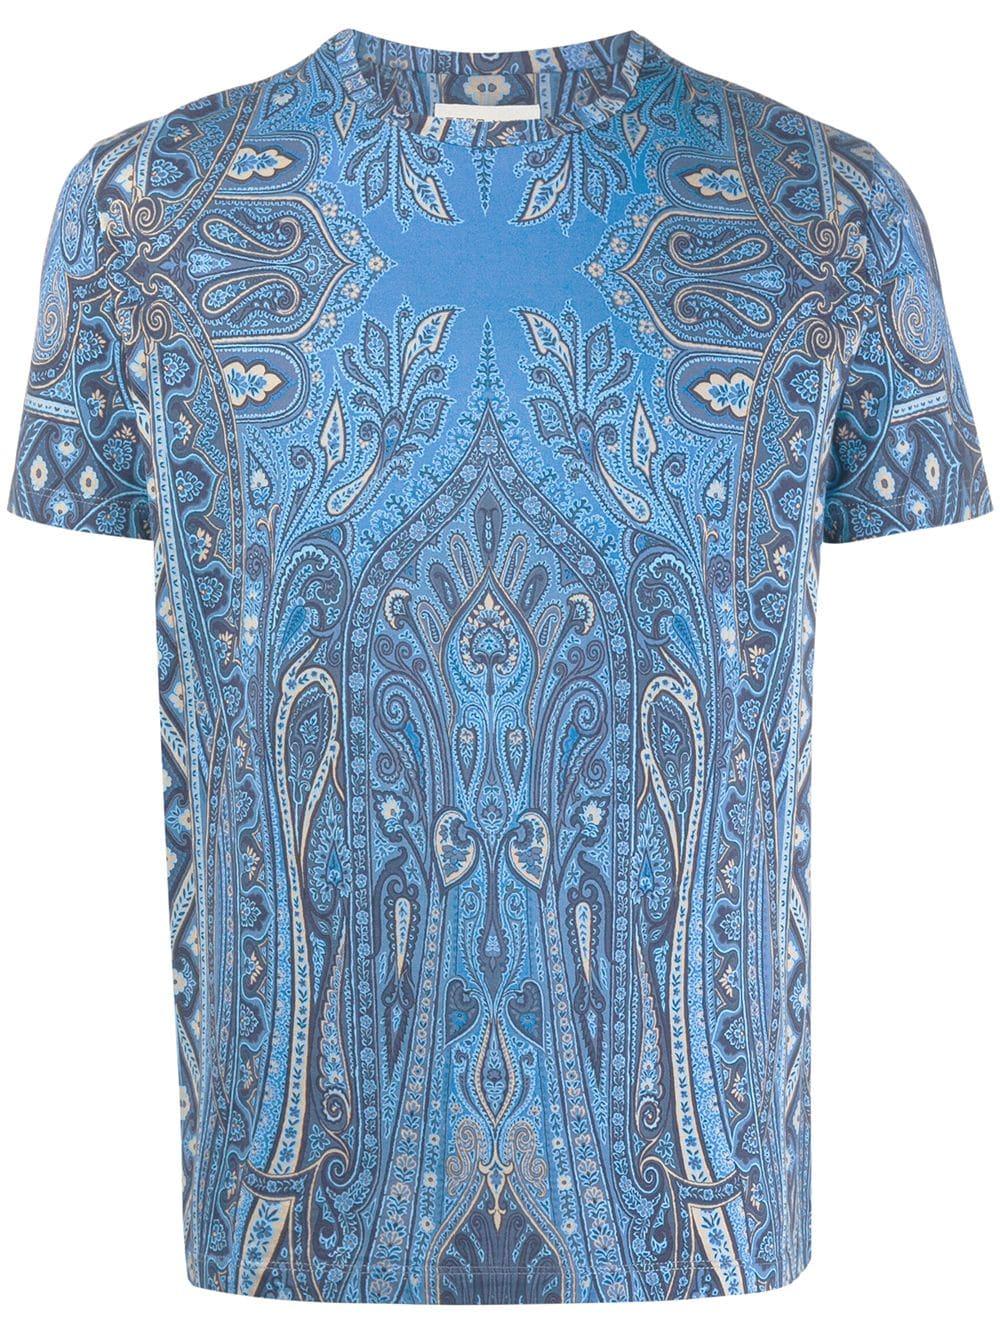 Etro Relaxed-fit Paisley T-shirt in Blue for Men - Lyst